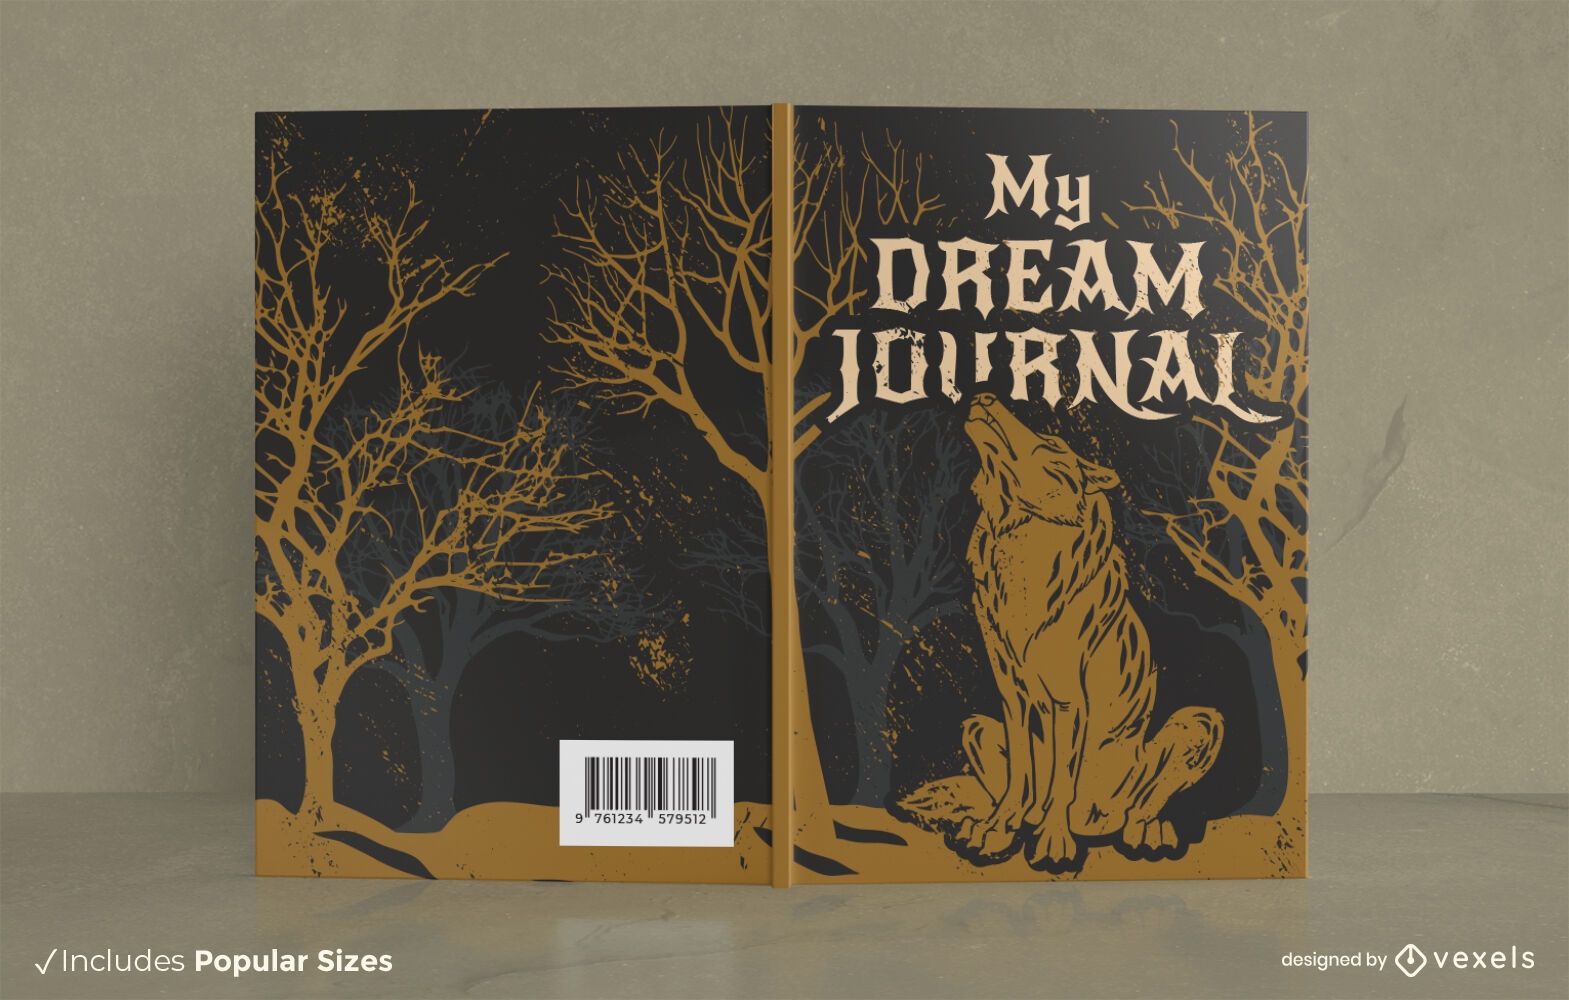 My dream journal wolf book cover design